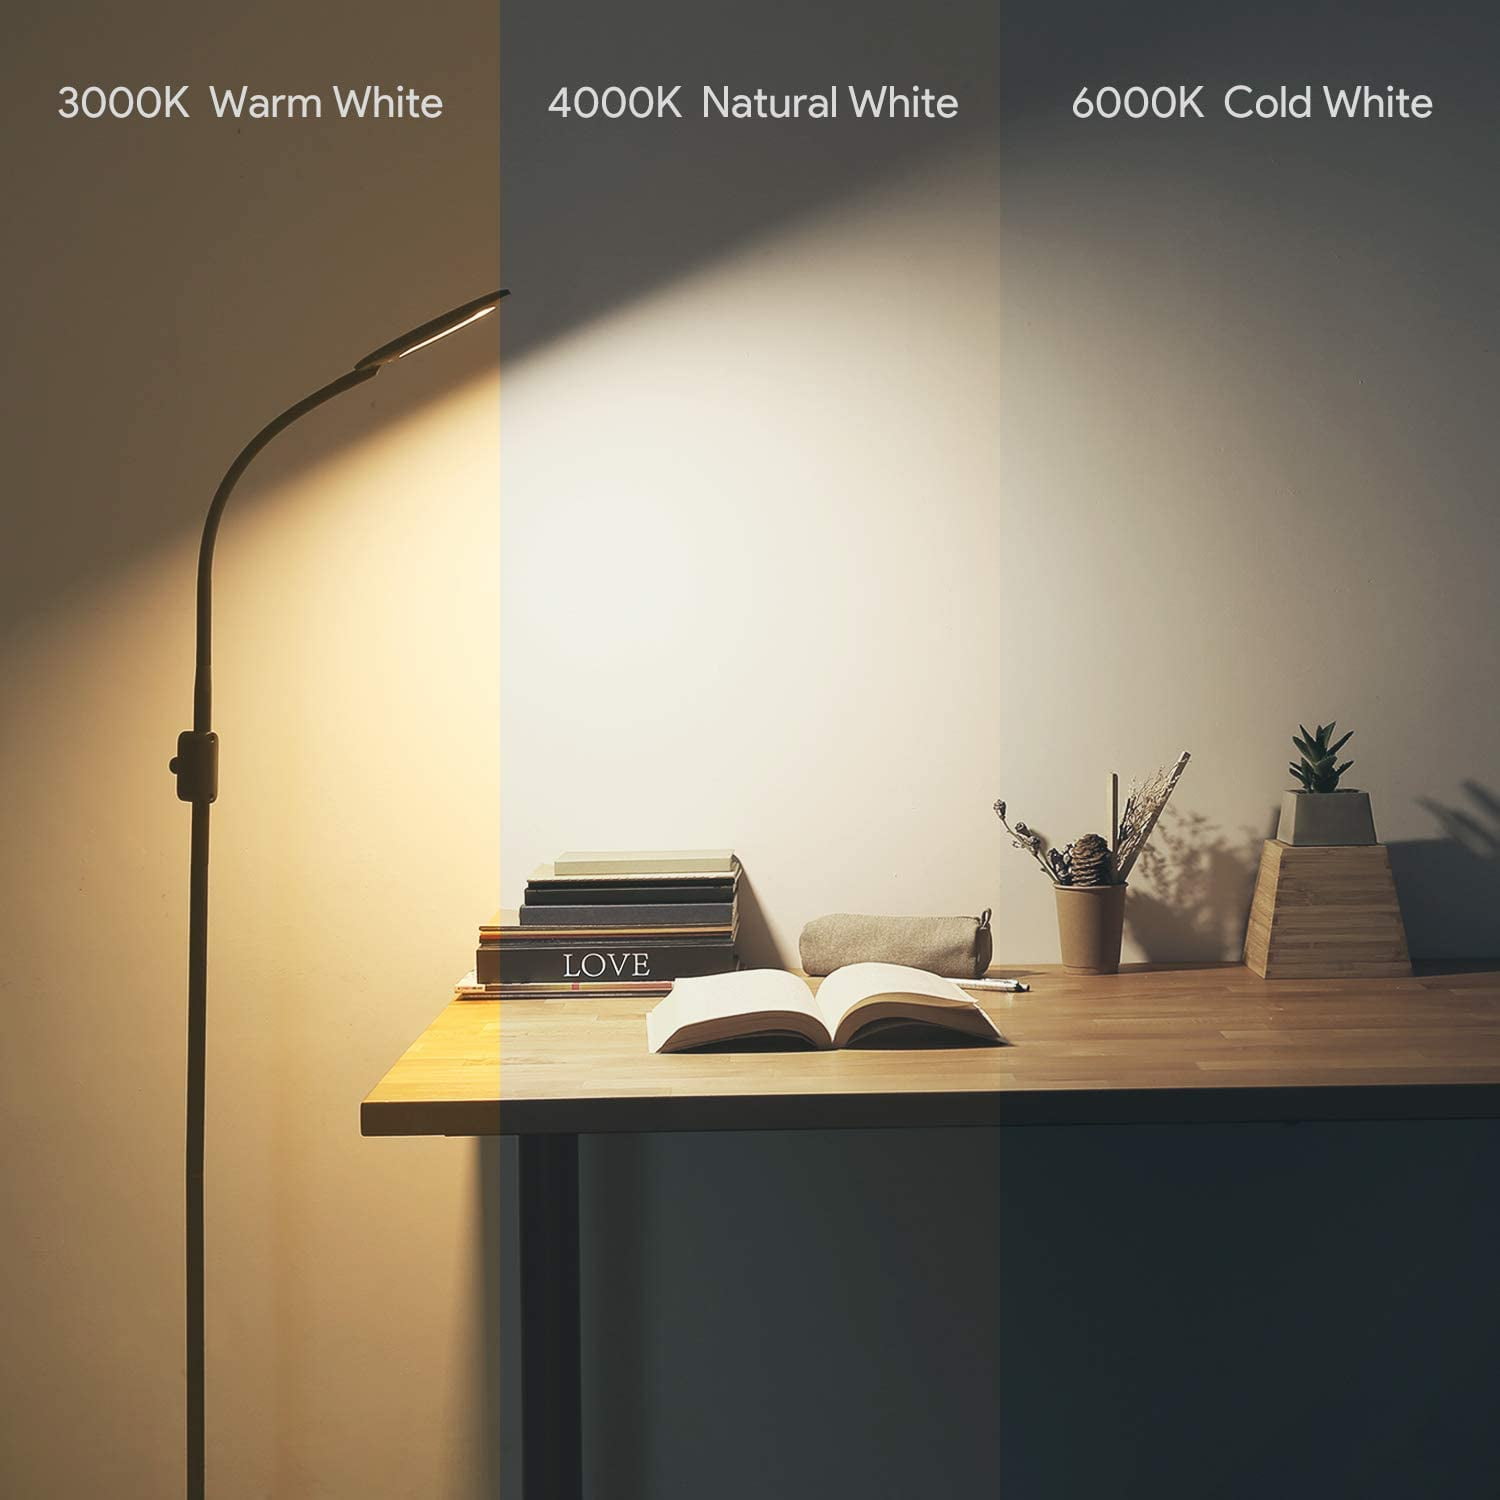 AUKEY LED Floor Lamp, 3 Color Temperatures & 20 Dimmable Brightness Levels, Eye Care Floor Light